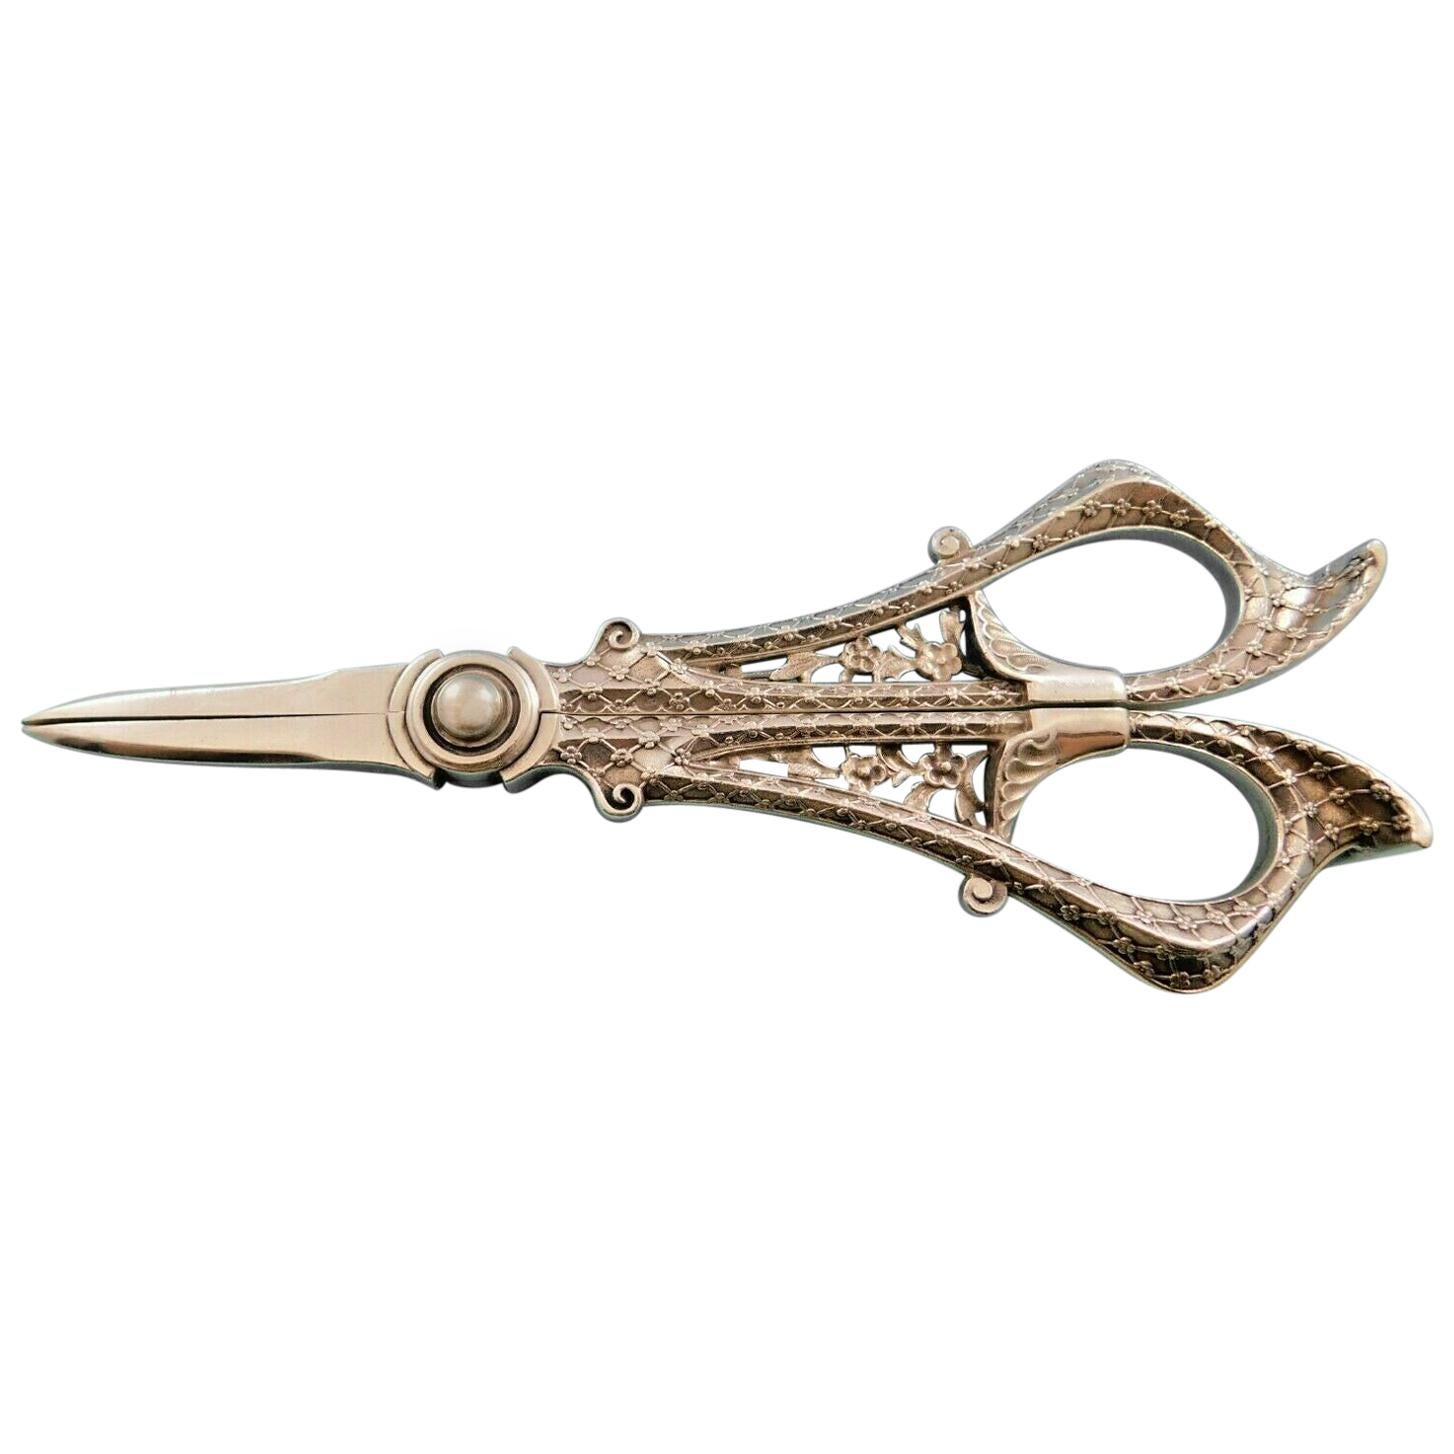 Persian by Tiffany and Co Sterling Silver Grape Shears Pierced Handles Vermeil